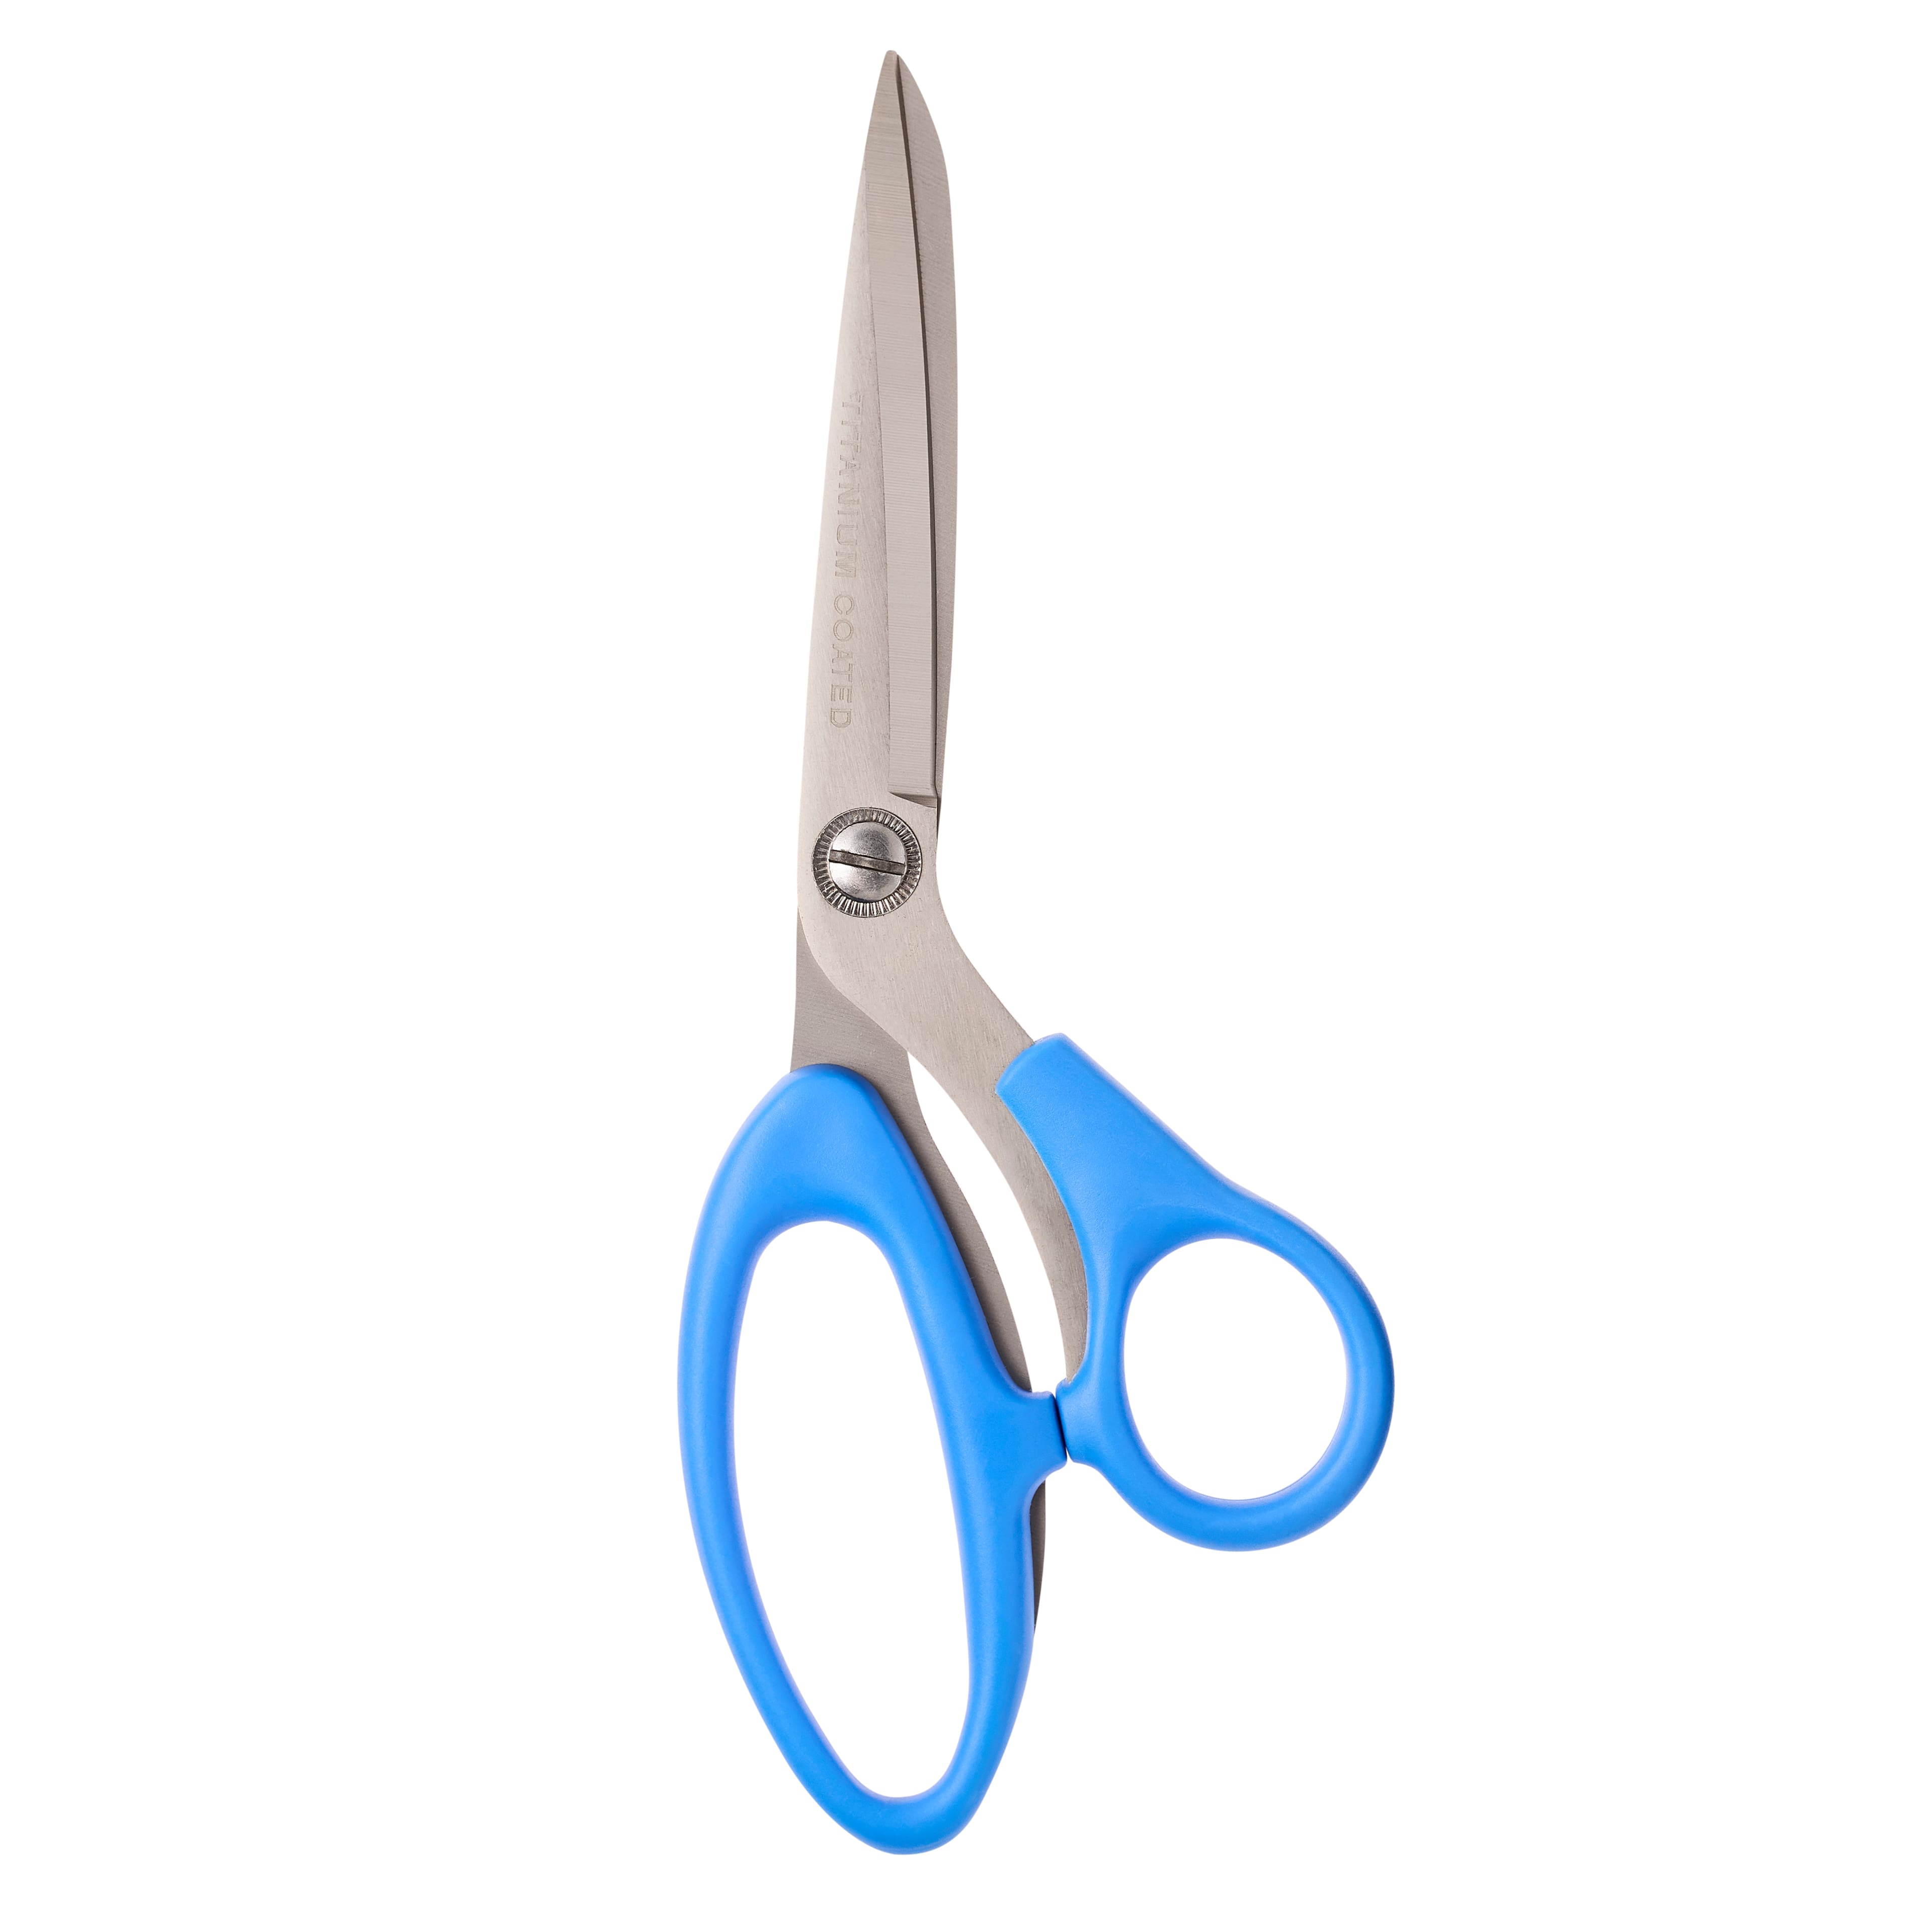 Shop for the Titanium Alloy Bonded Steel Premium Scissors By Loops   Threads™ at Michaels